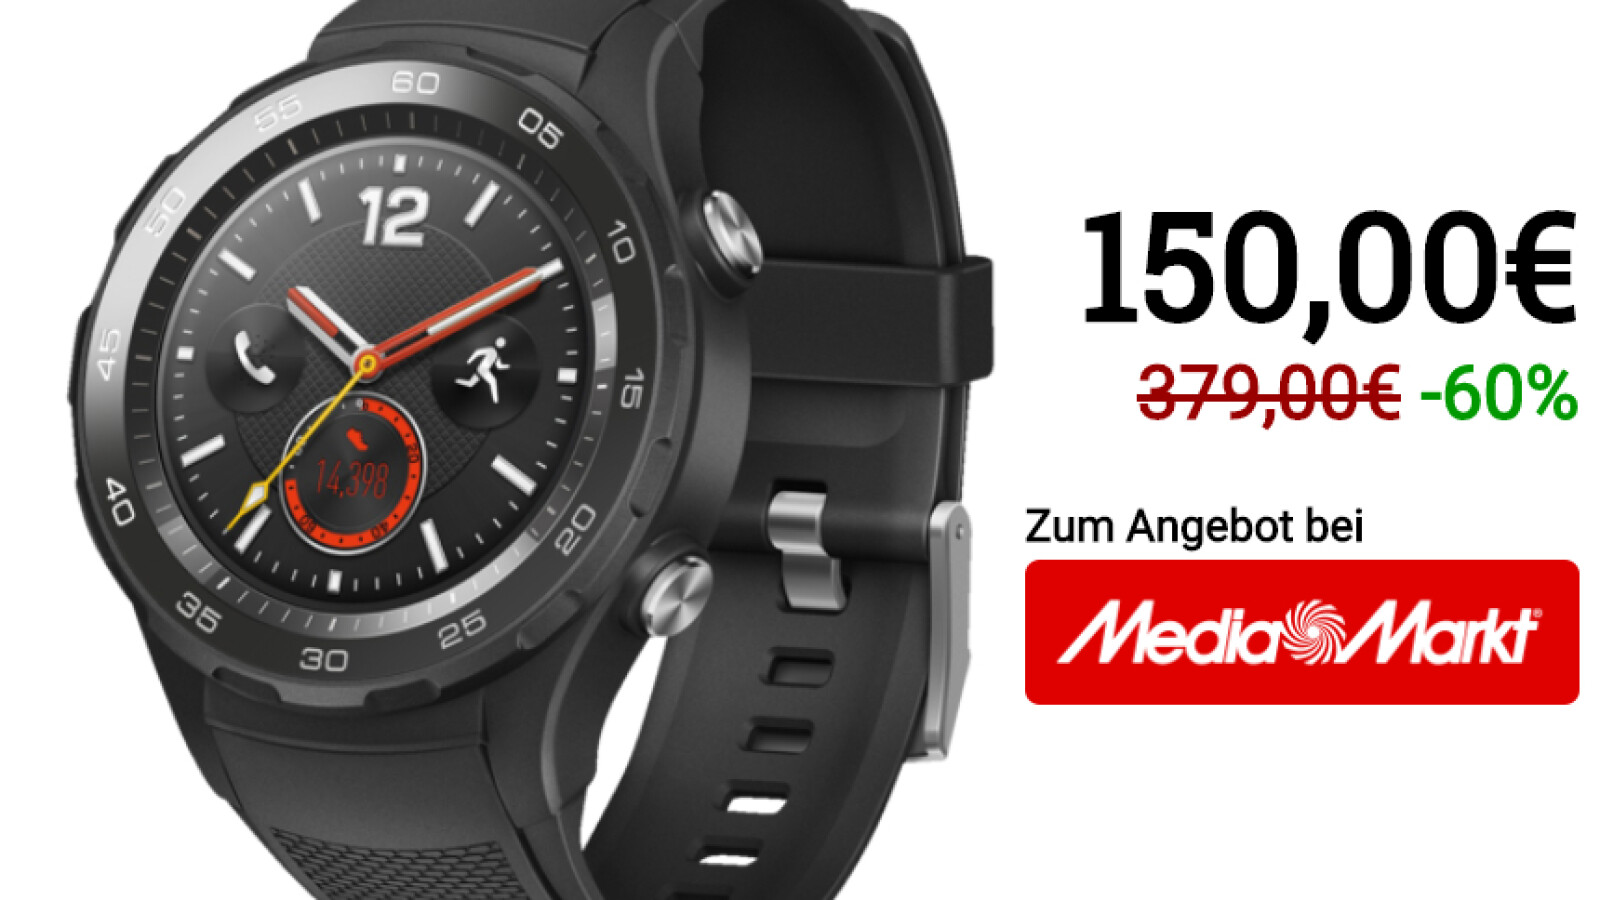 Huawei Watch 2: mega bargains in late-night Media Markt - World Today News